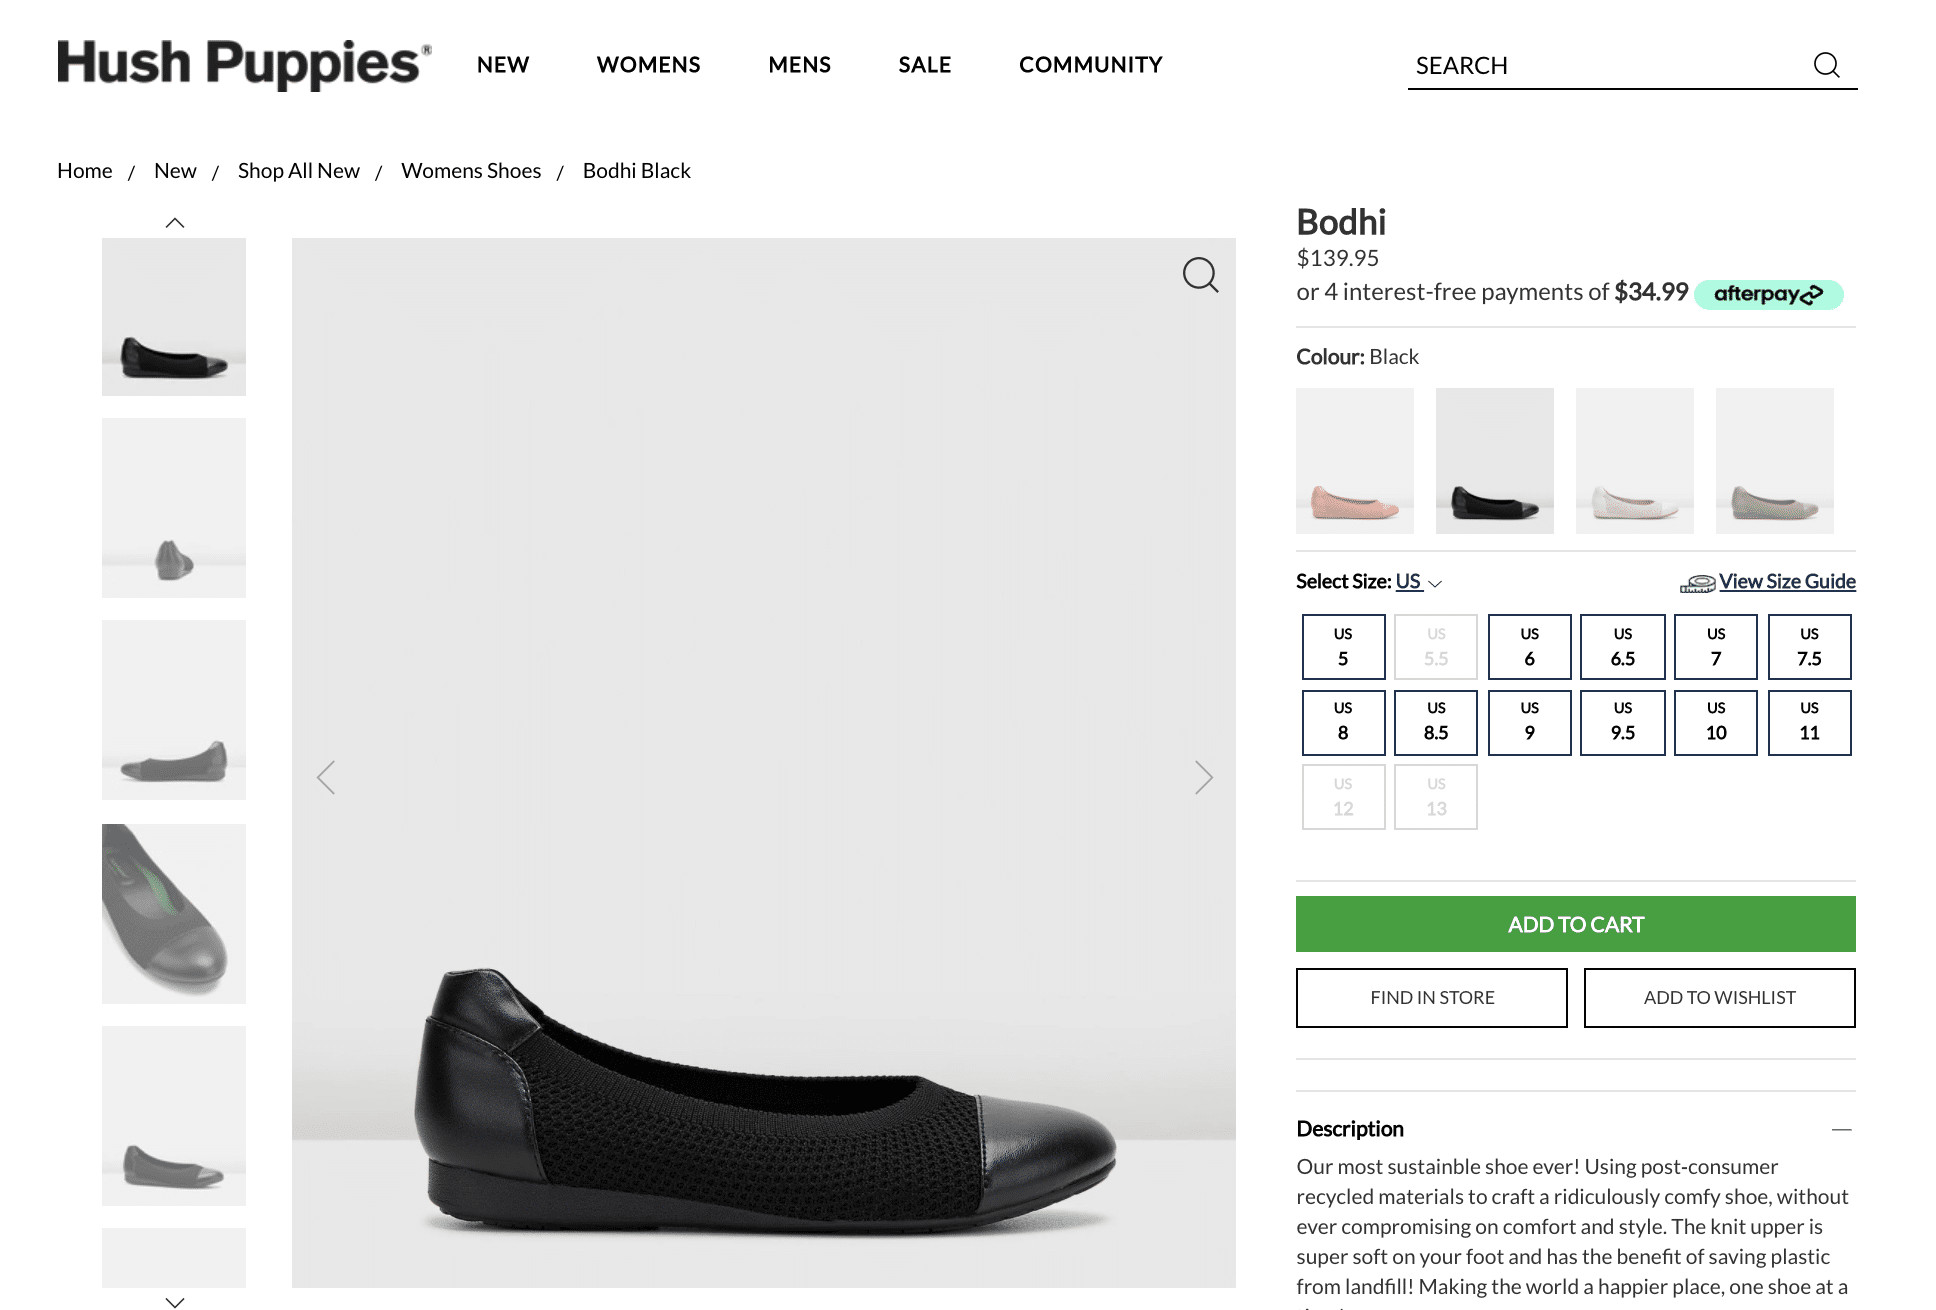 Hush Puppies provides extensive product pages so consumers can view shoes in large, detailed photographs.